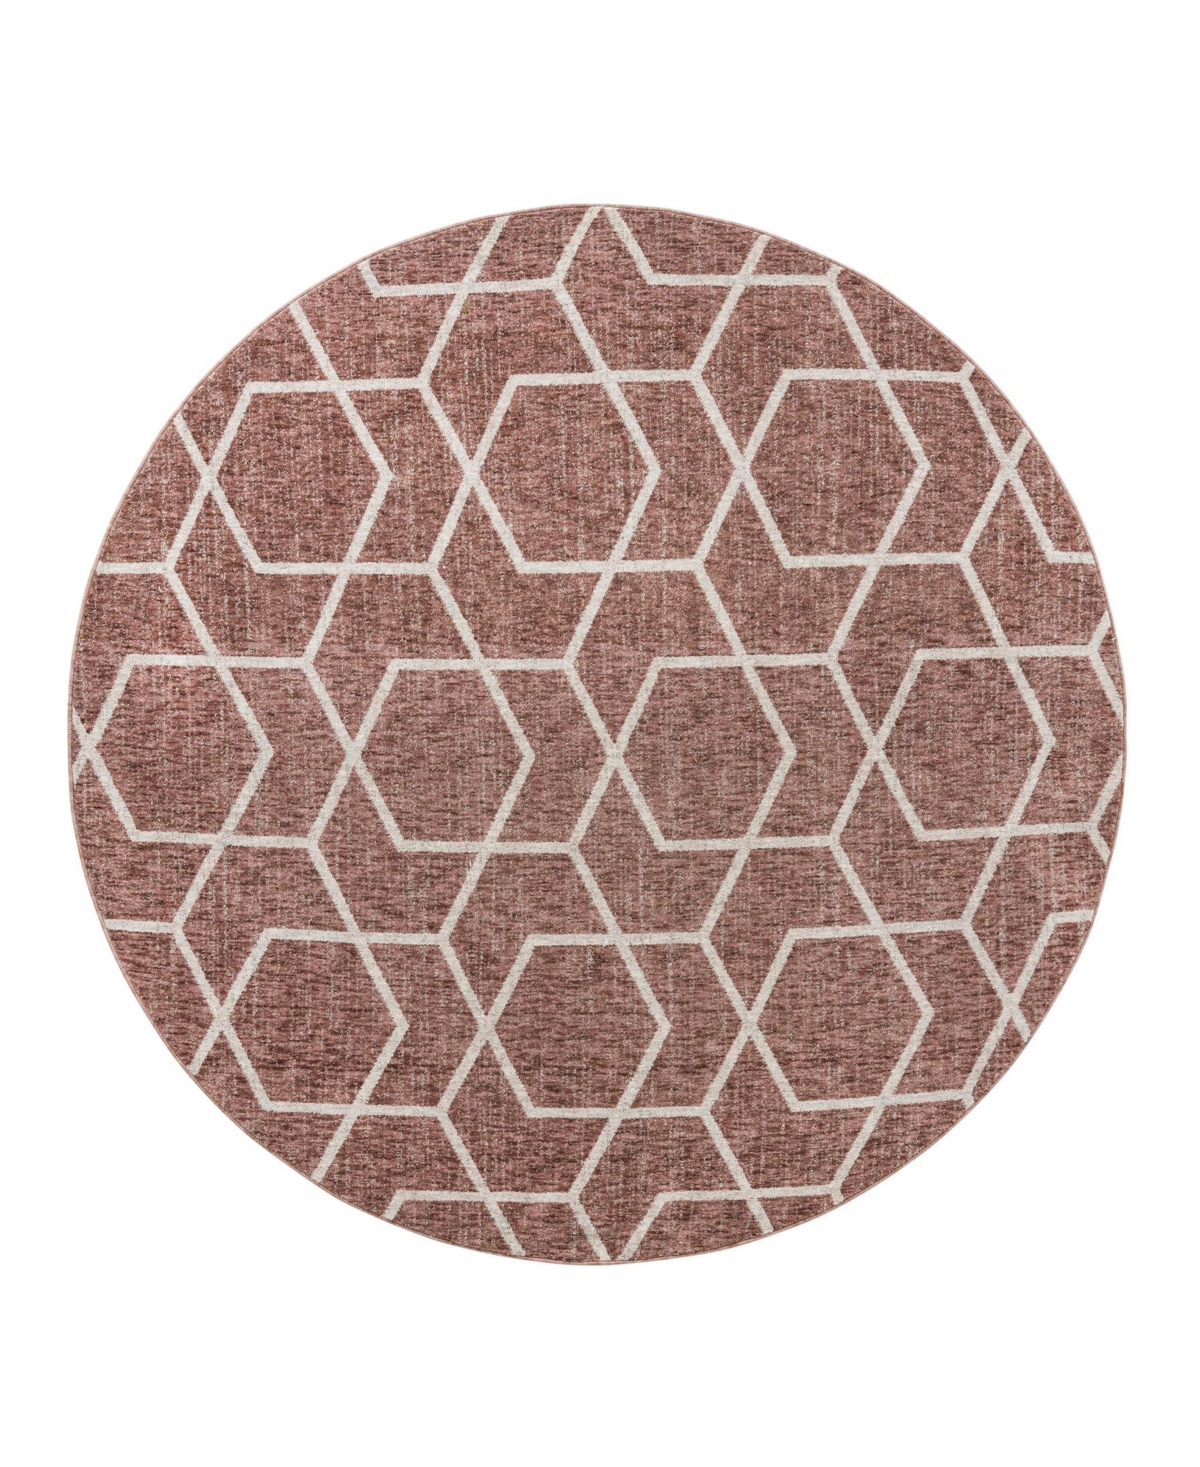 Bayshore Home Endure End01 7' X 7' Round Area Rug In Rose